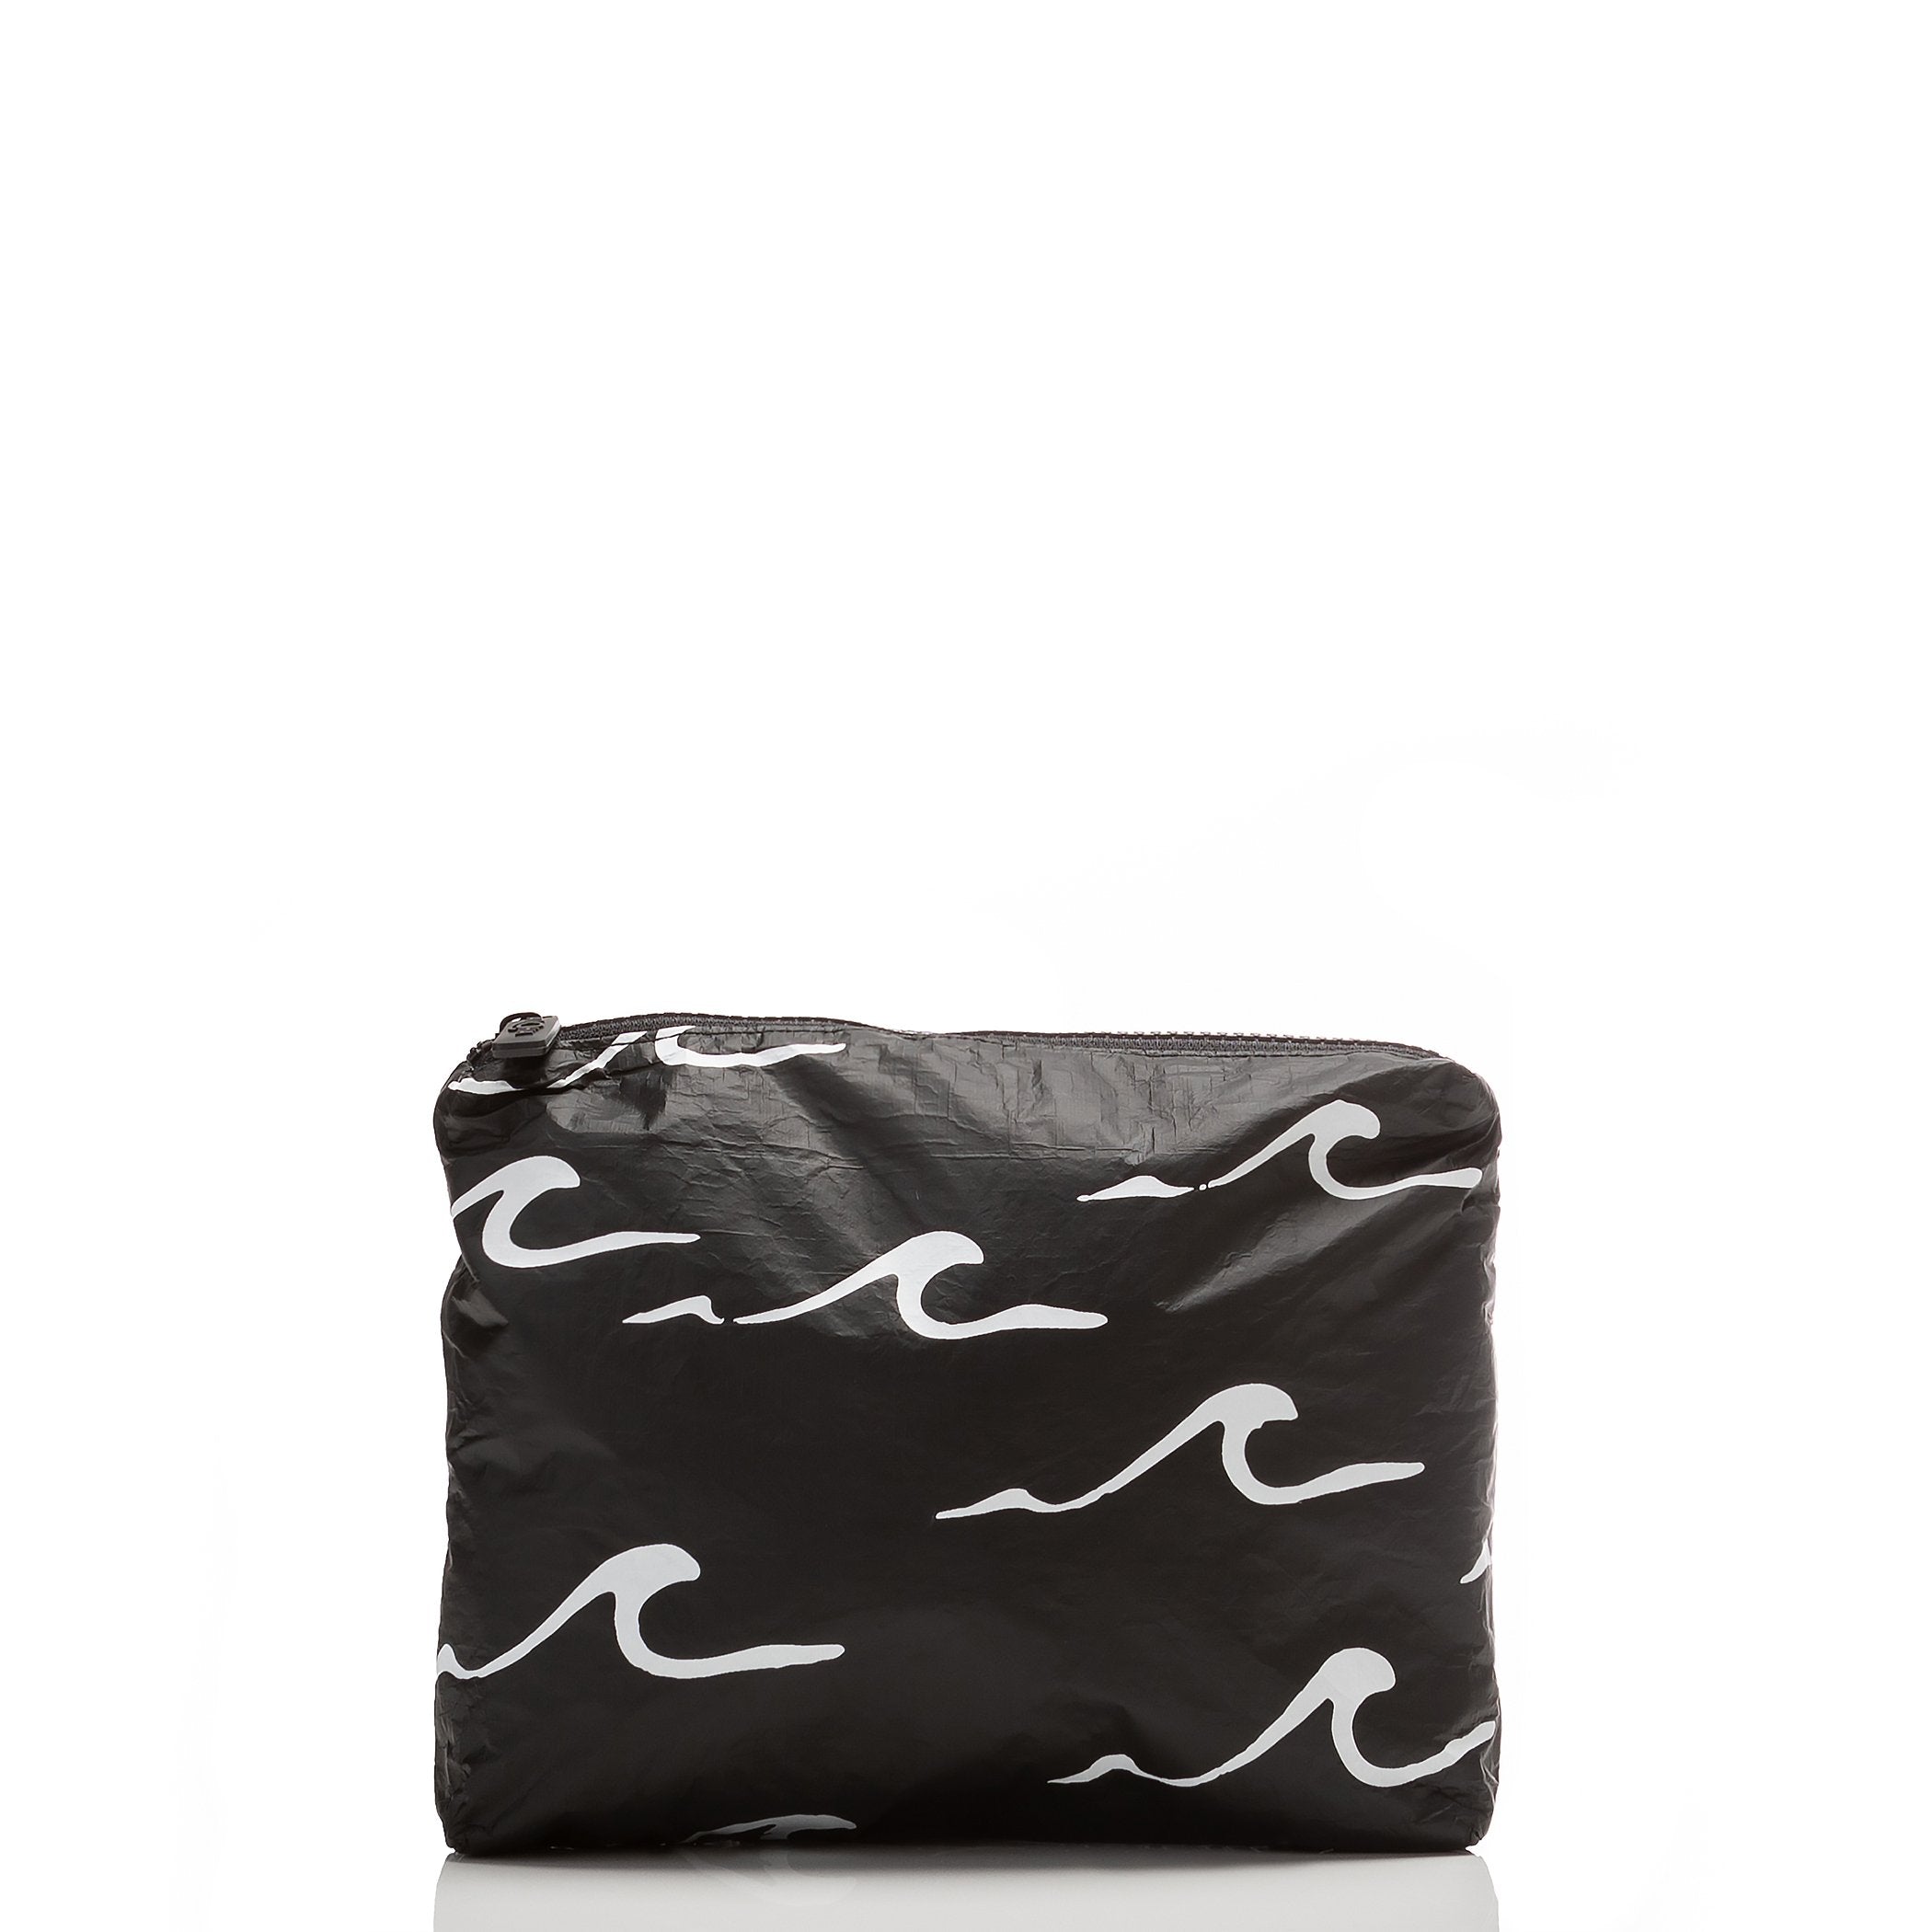 Seaside Small Pouch / Black